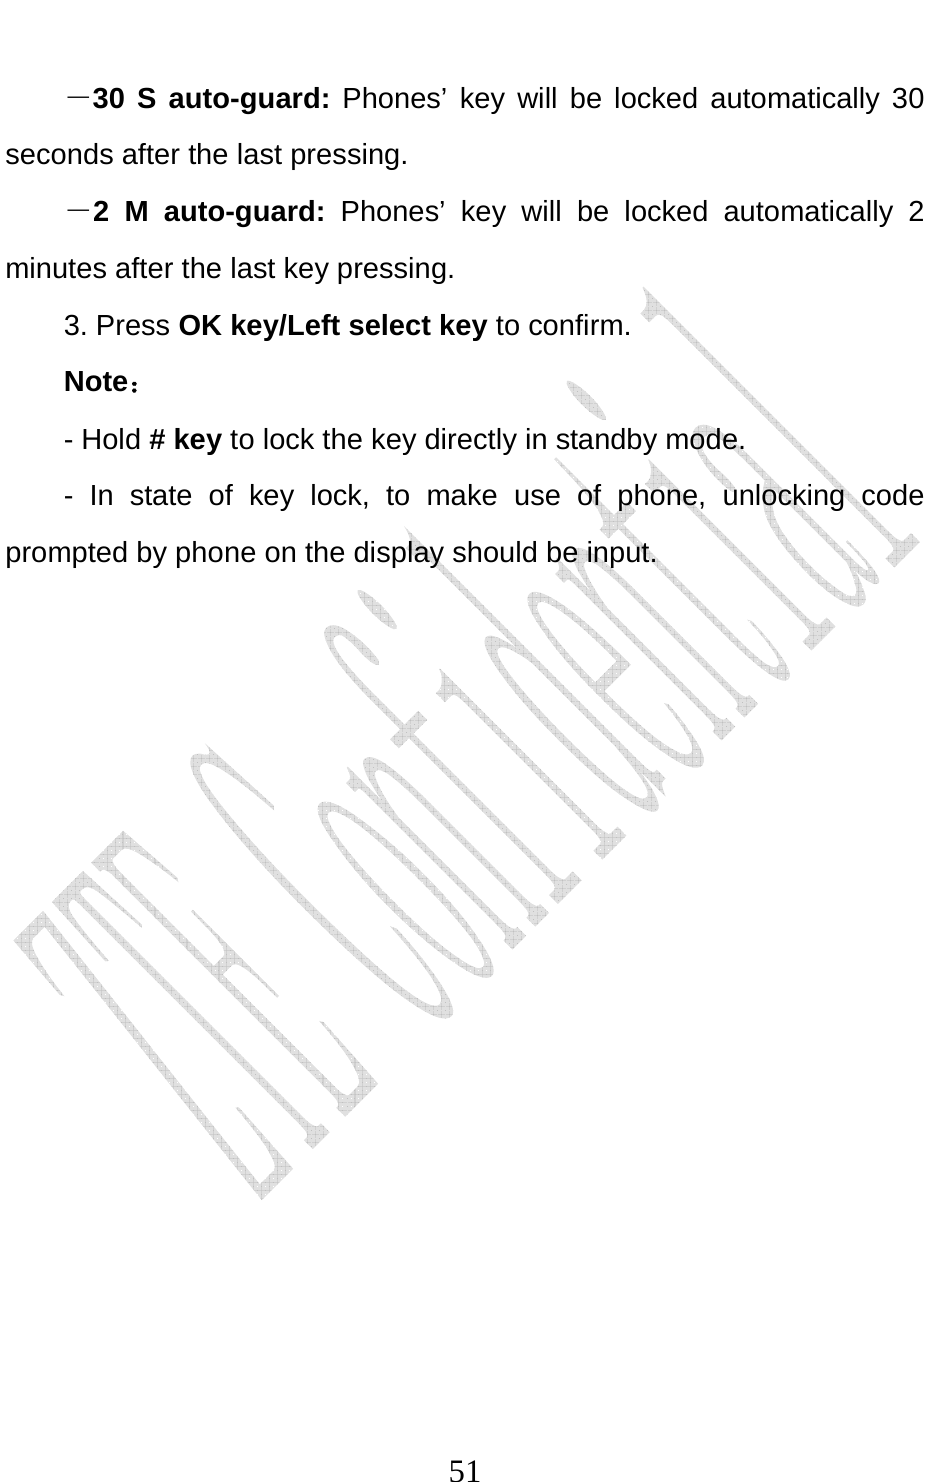                              51－30 S auto-guard: Phones’ key will be locked automatically 30 seconds after the last pressing. －2 M auto-guard: Phones’ key will be locked automatically 2 minutes after the last key pressing. 3. Press OK key/Left select key to confirm. Note： - Hold # key to lock the key directly in standby mode. - In state of key lock, to make use of phone, unlocking code prompted by phone on the display should be input.   